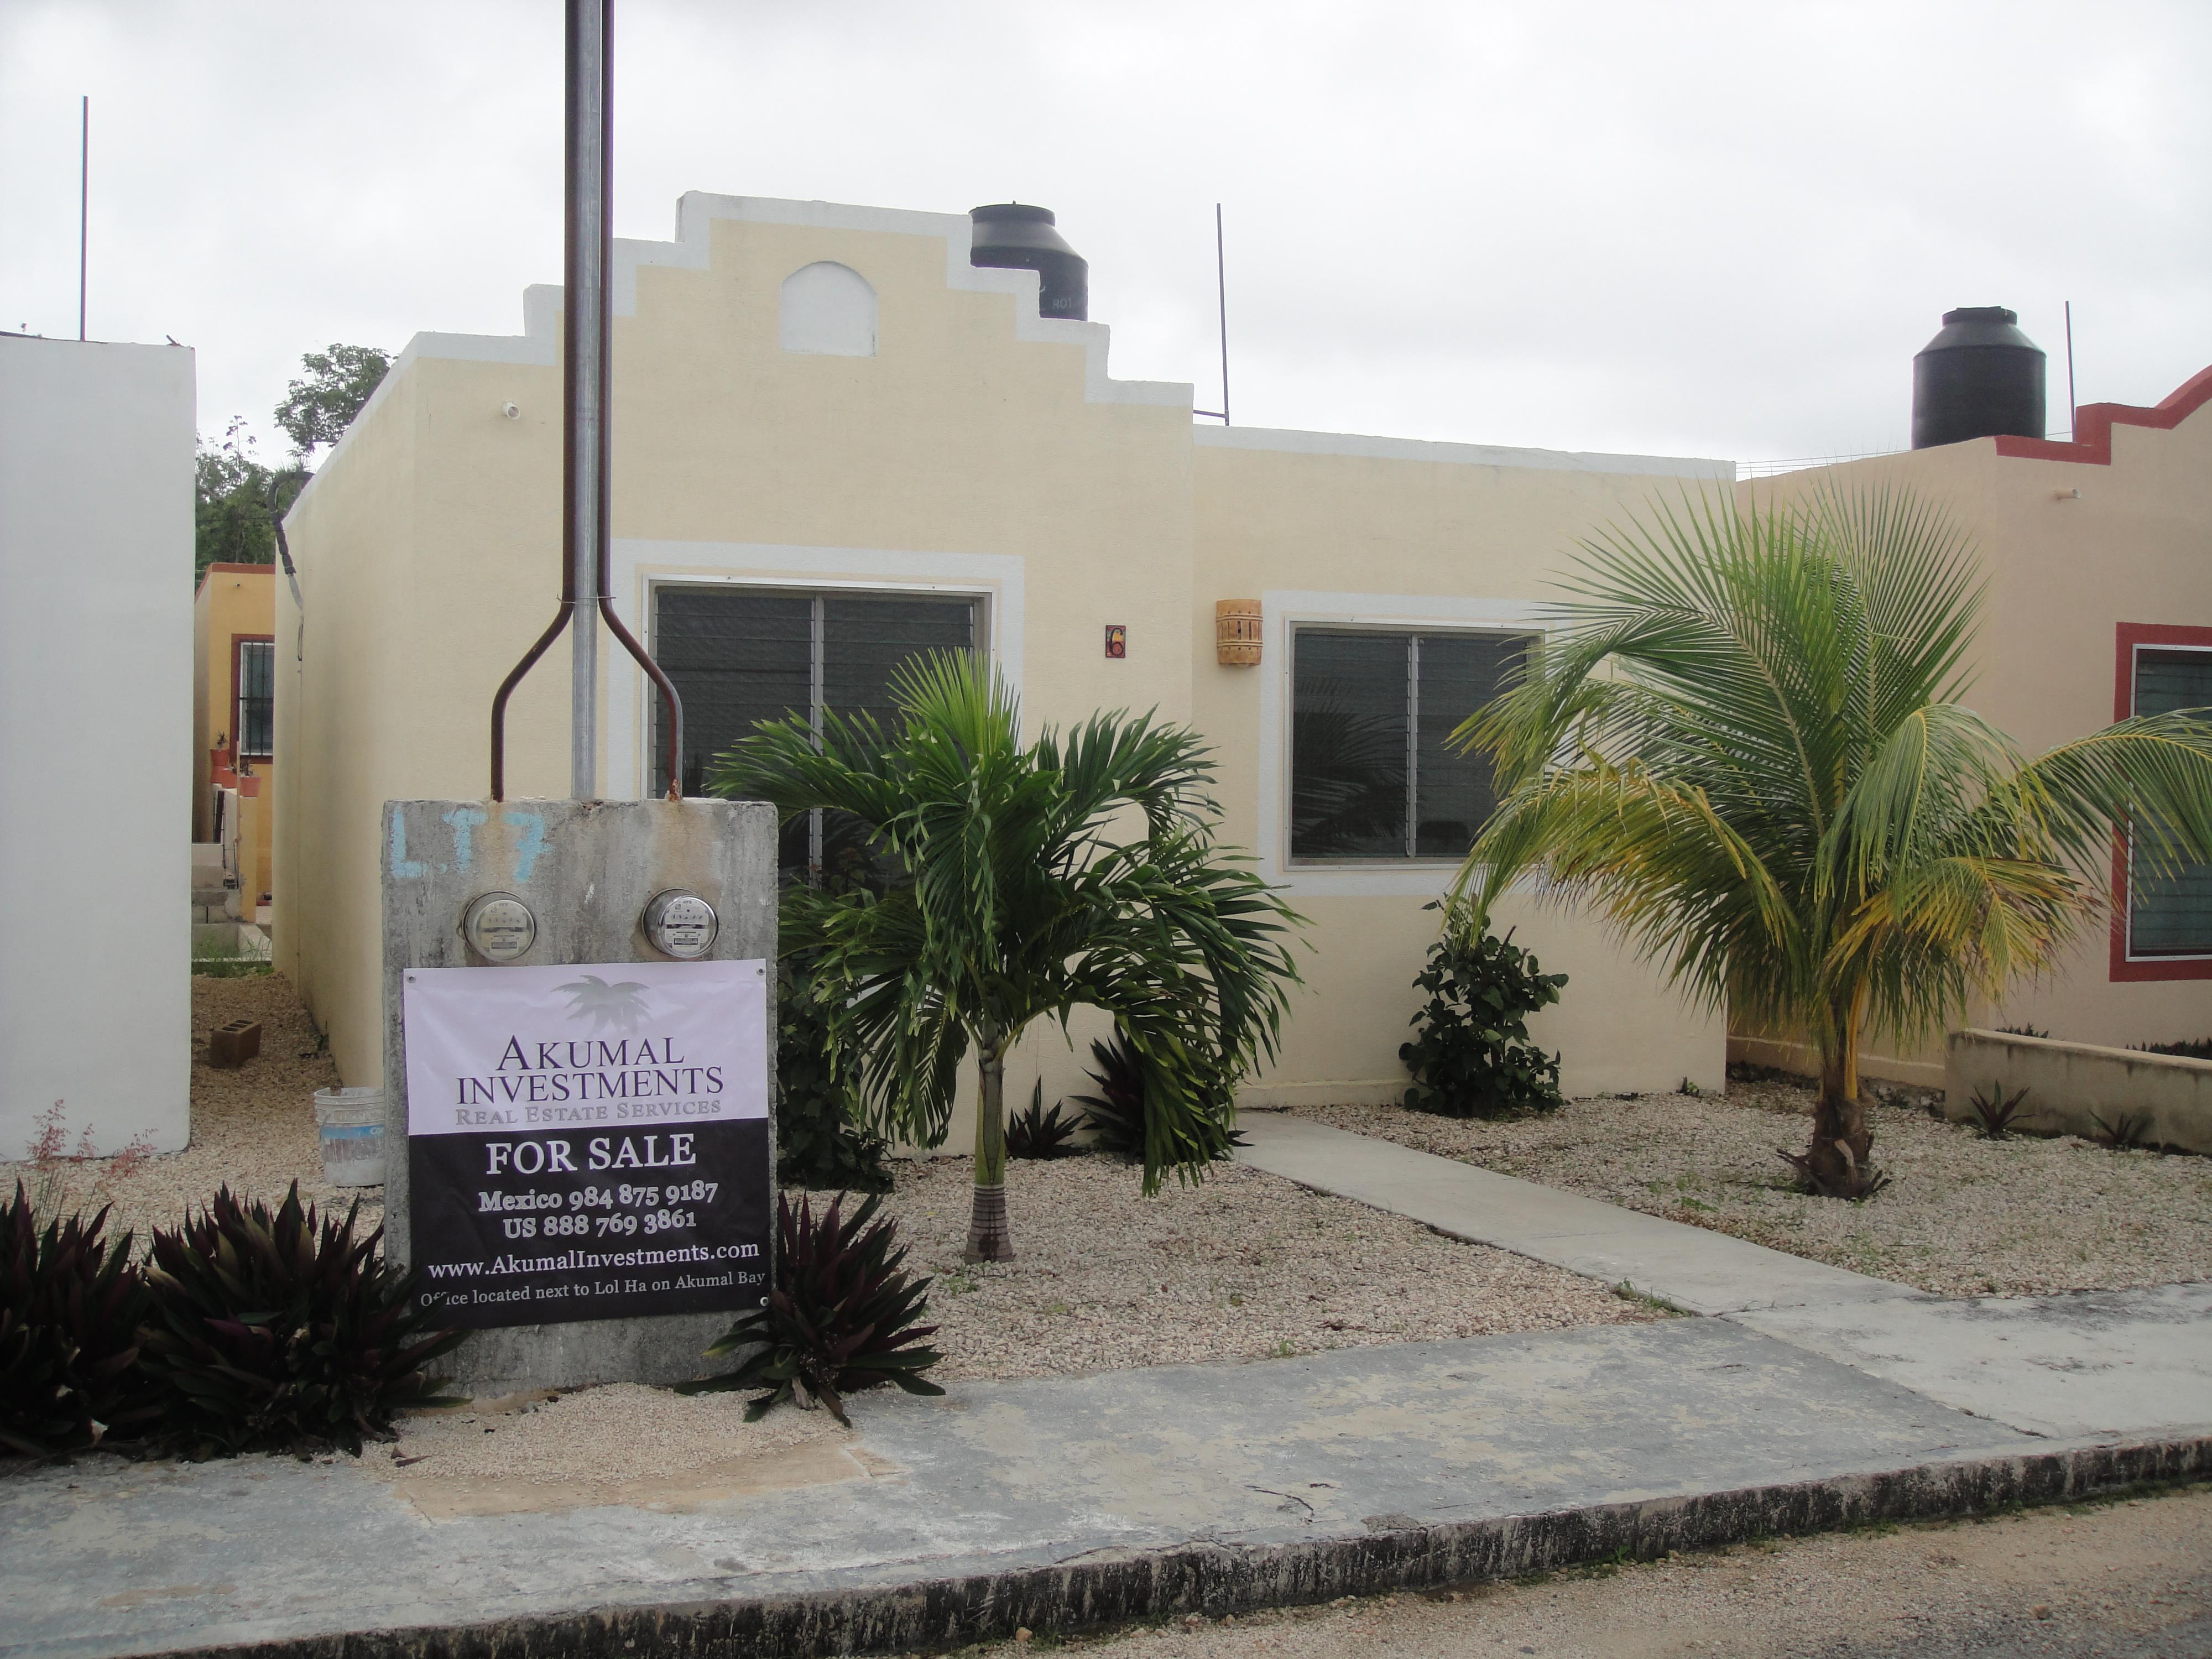 Chan Chemuyil Real Estate offered by Akumal Investments